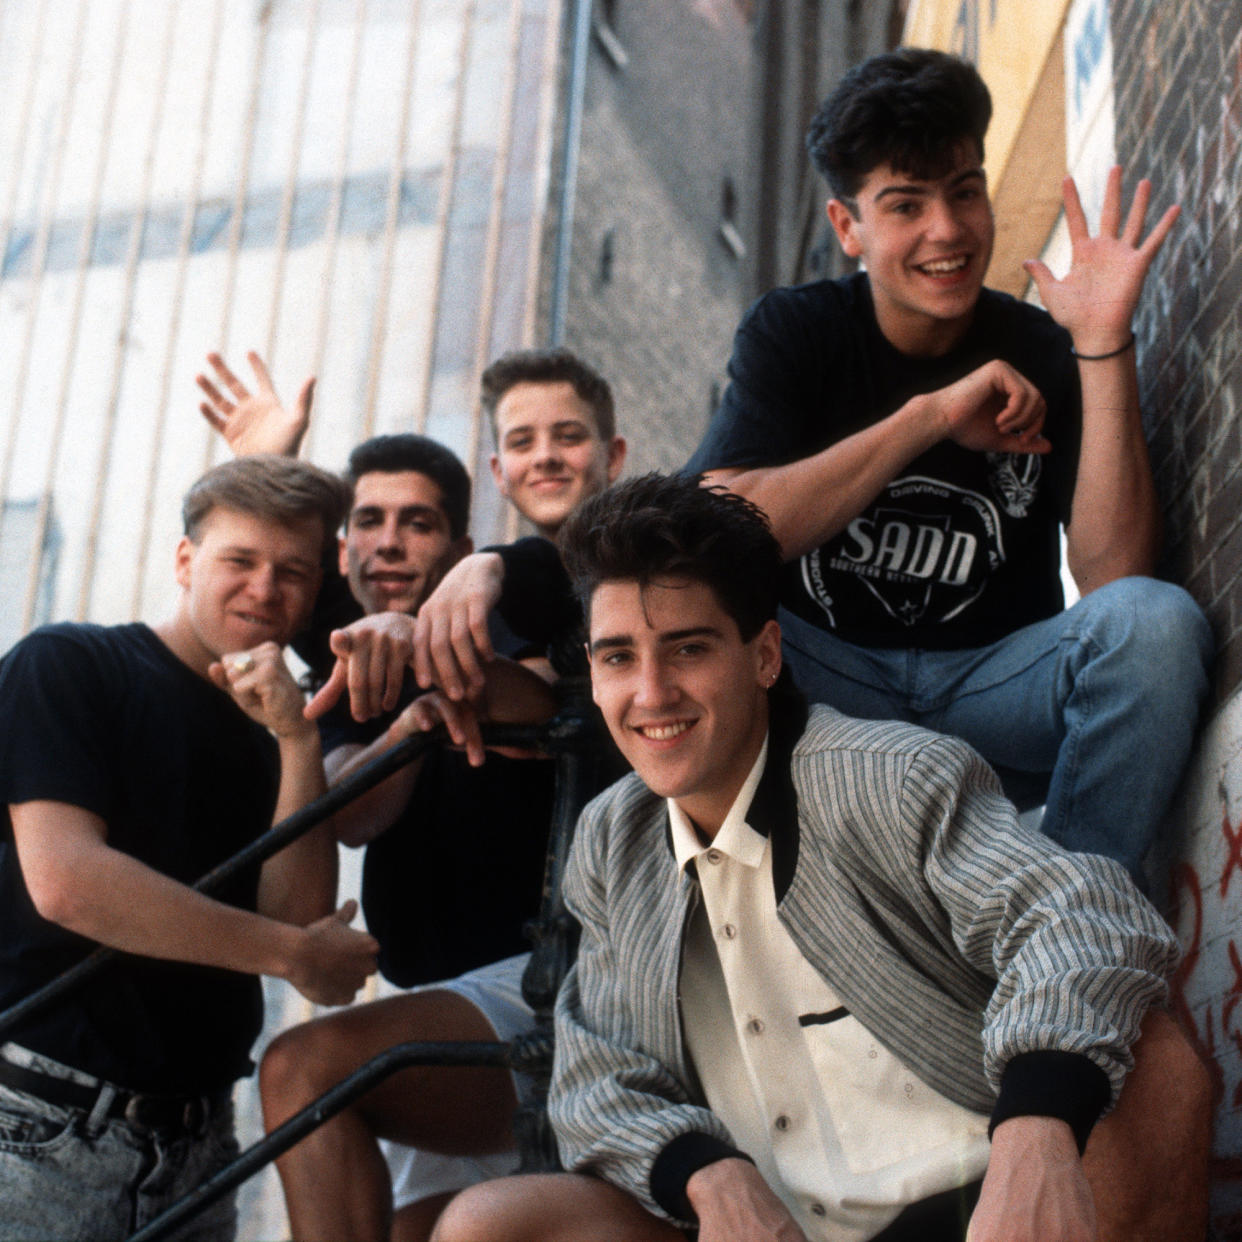 Photo of NEW KIDS ON THE BLOCK and Donnie WAHLBERG and Joey McINTYRE and Danny WOOD and Jonathan KNIGHT and Jordan KNIGHT (Michel Linssen / Redferns)